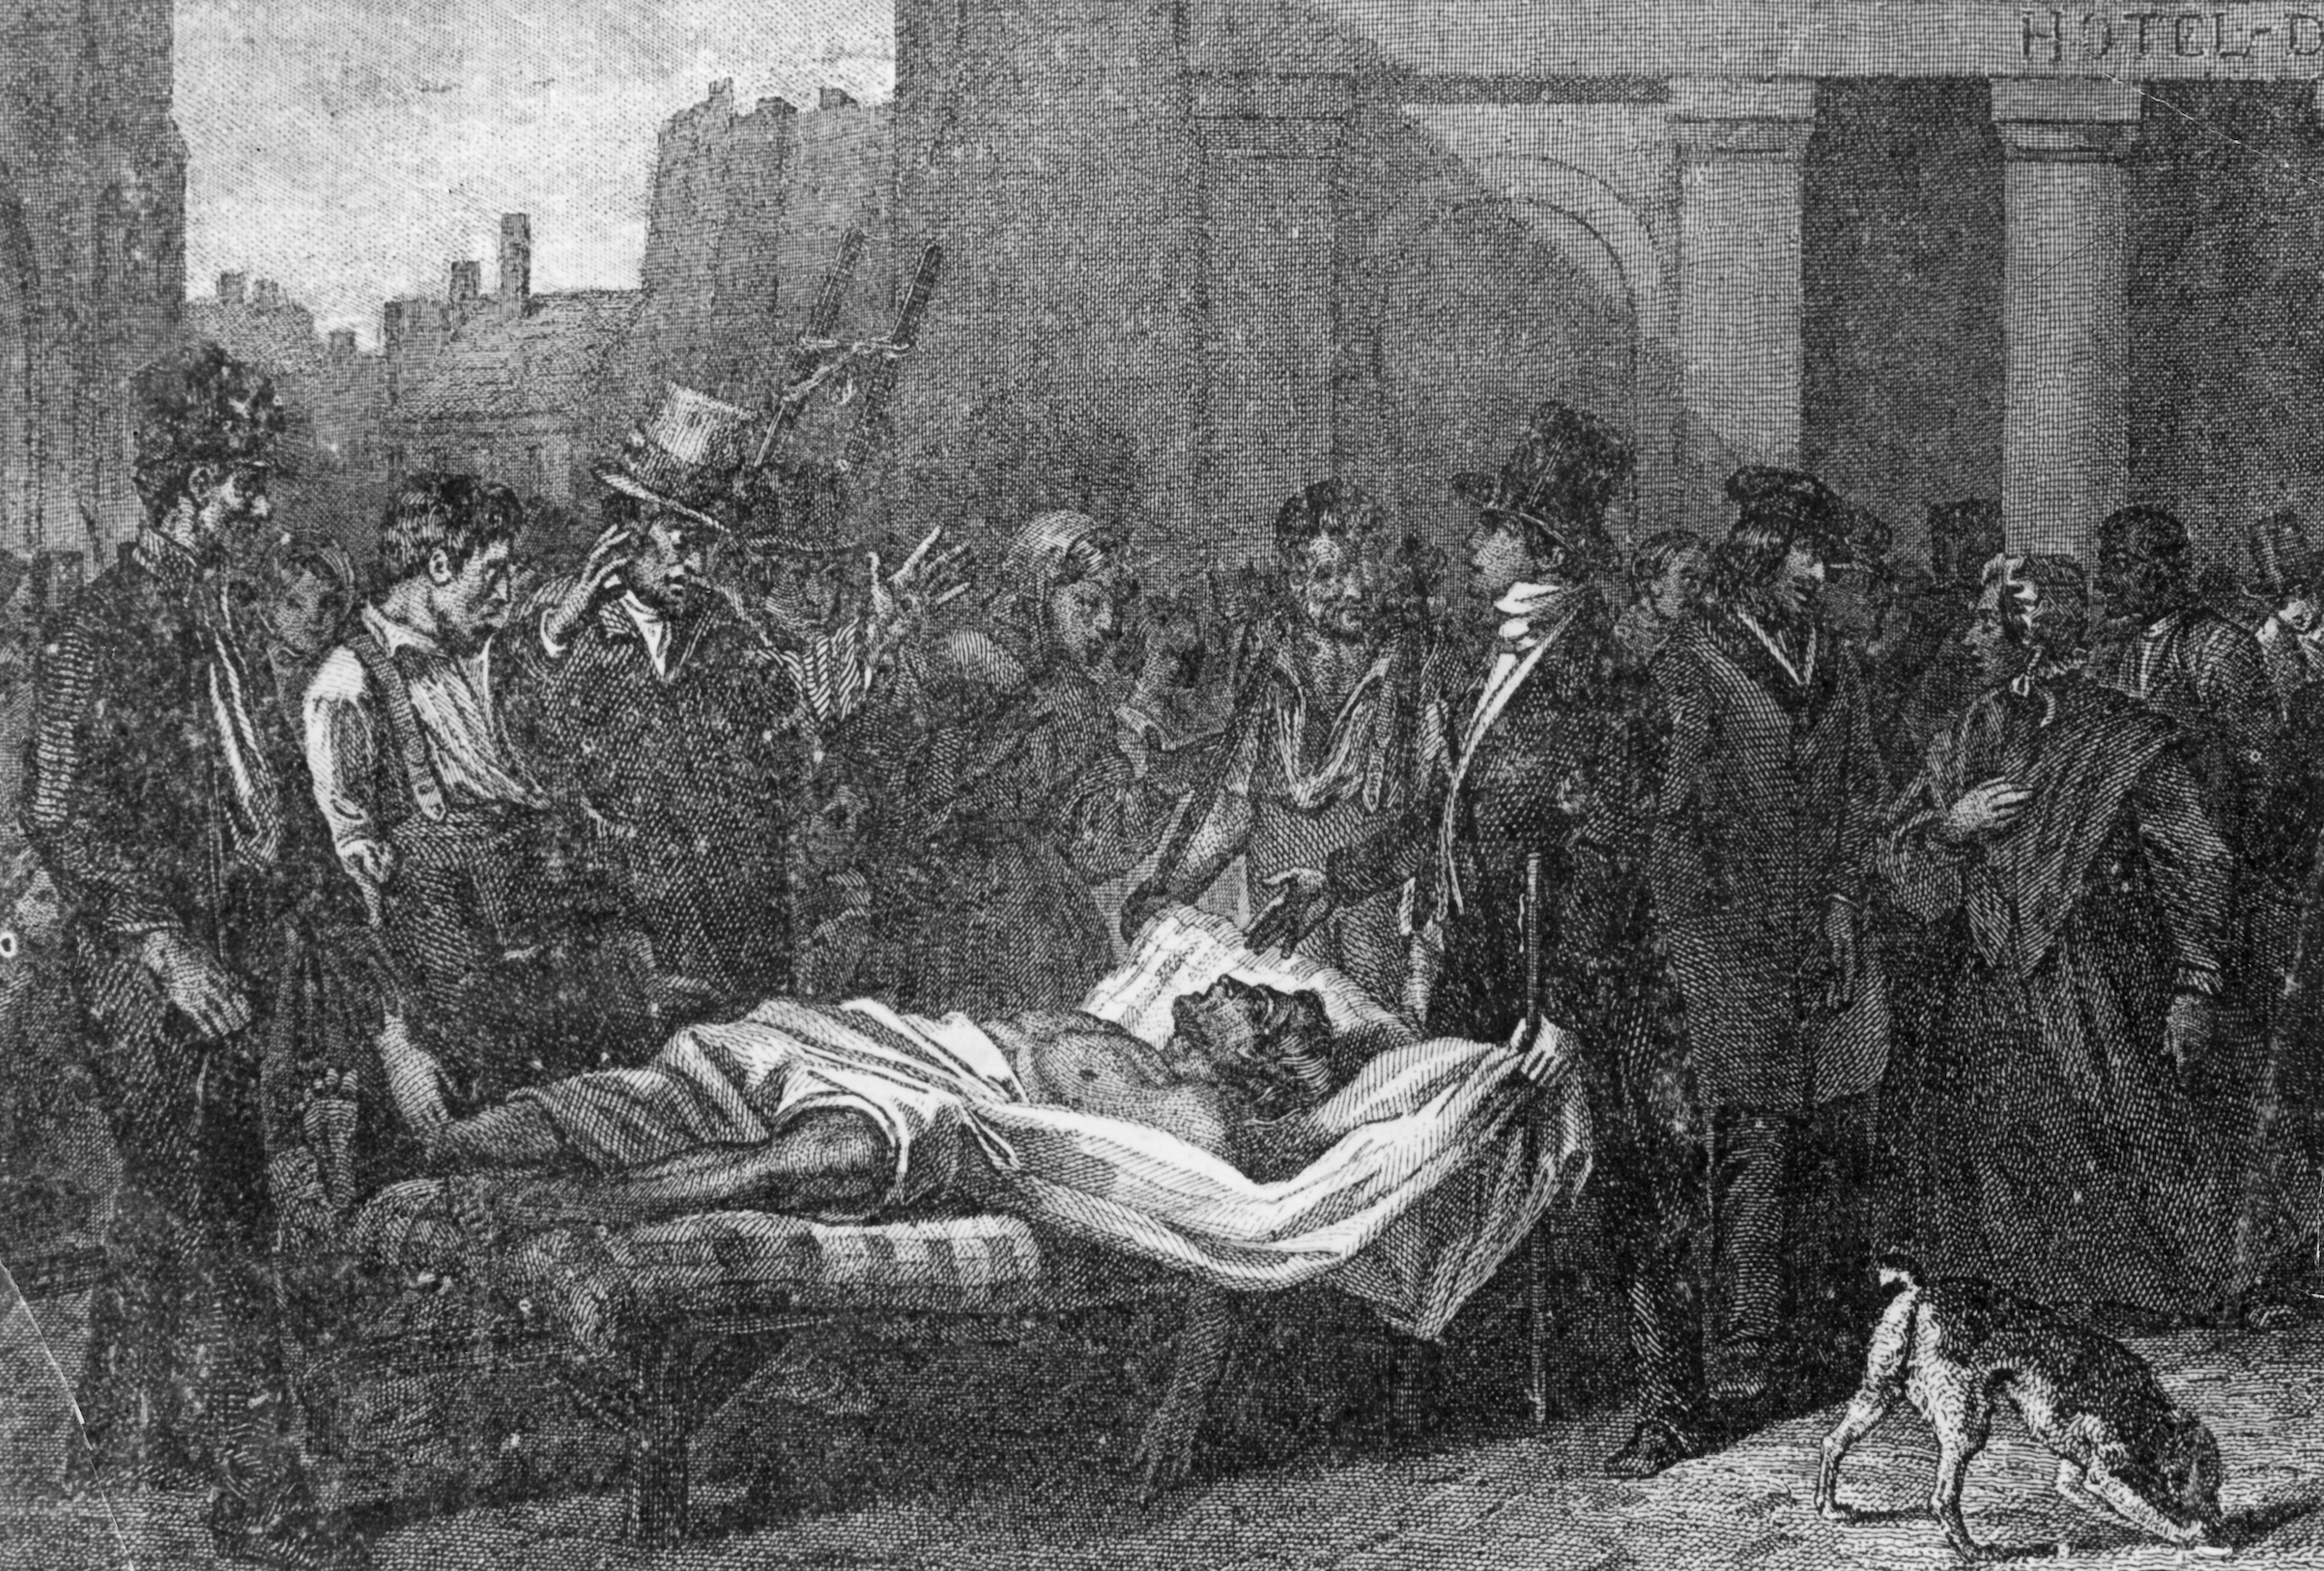 A victim of the cholera epidemic in Paris, 1832. (Getty Images)